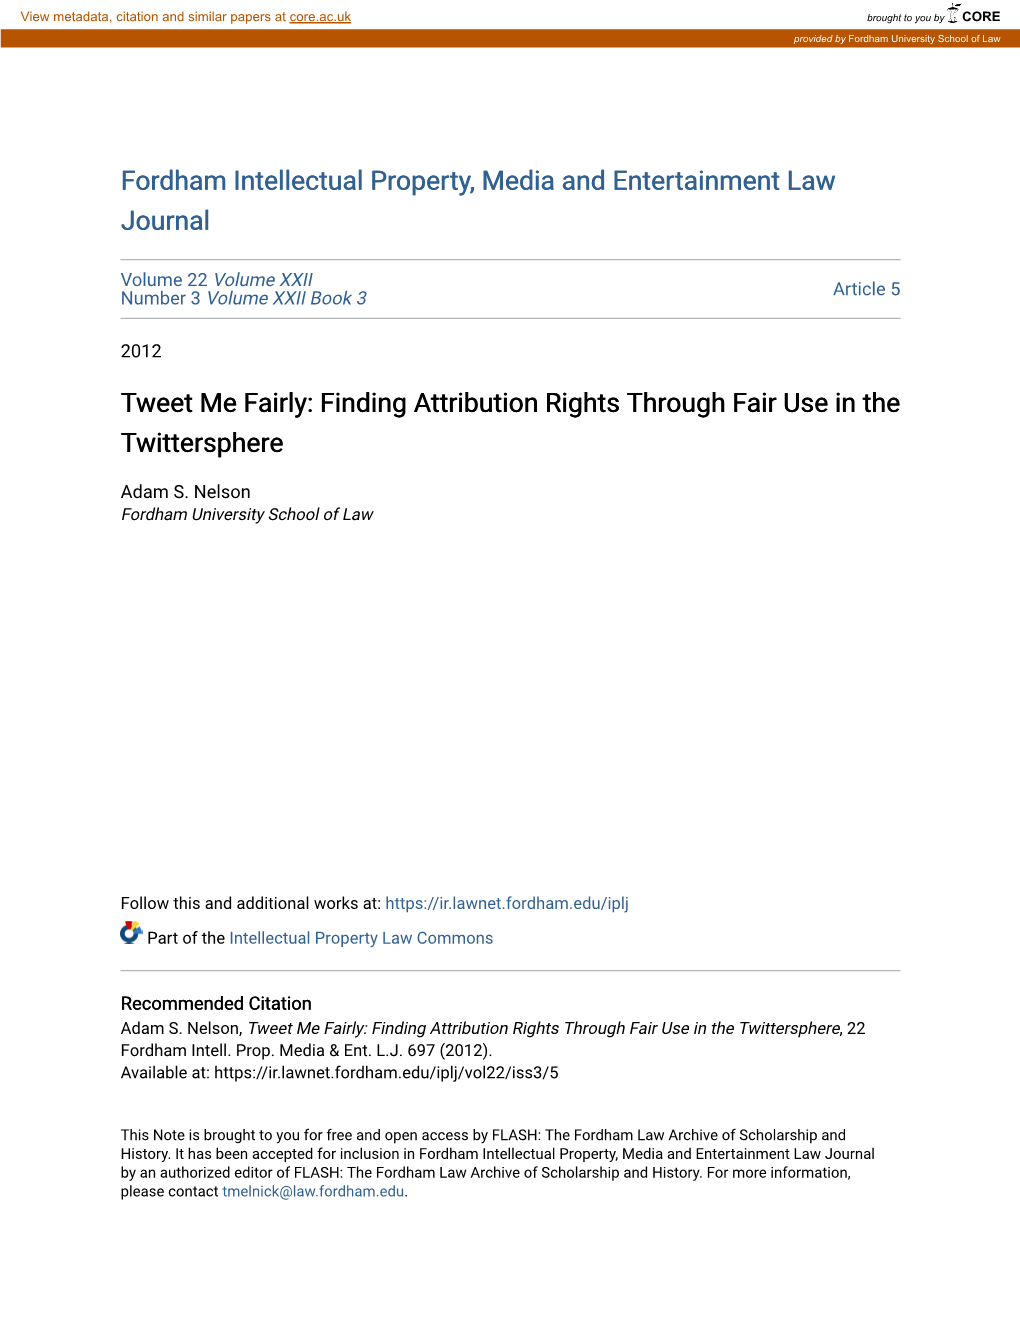 Tweet Me Fairly: Finding Attribution Rights Through Fair Use in the Twittersphere